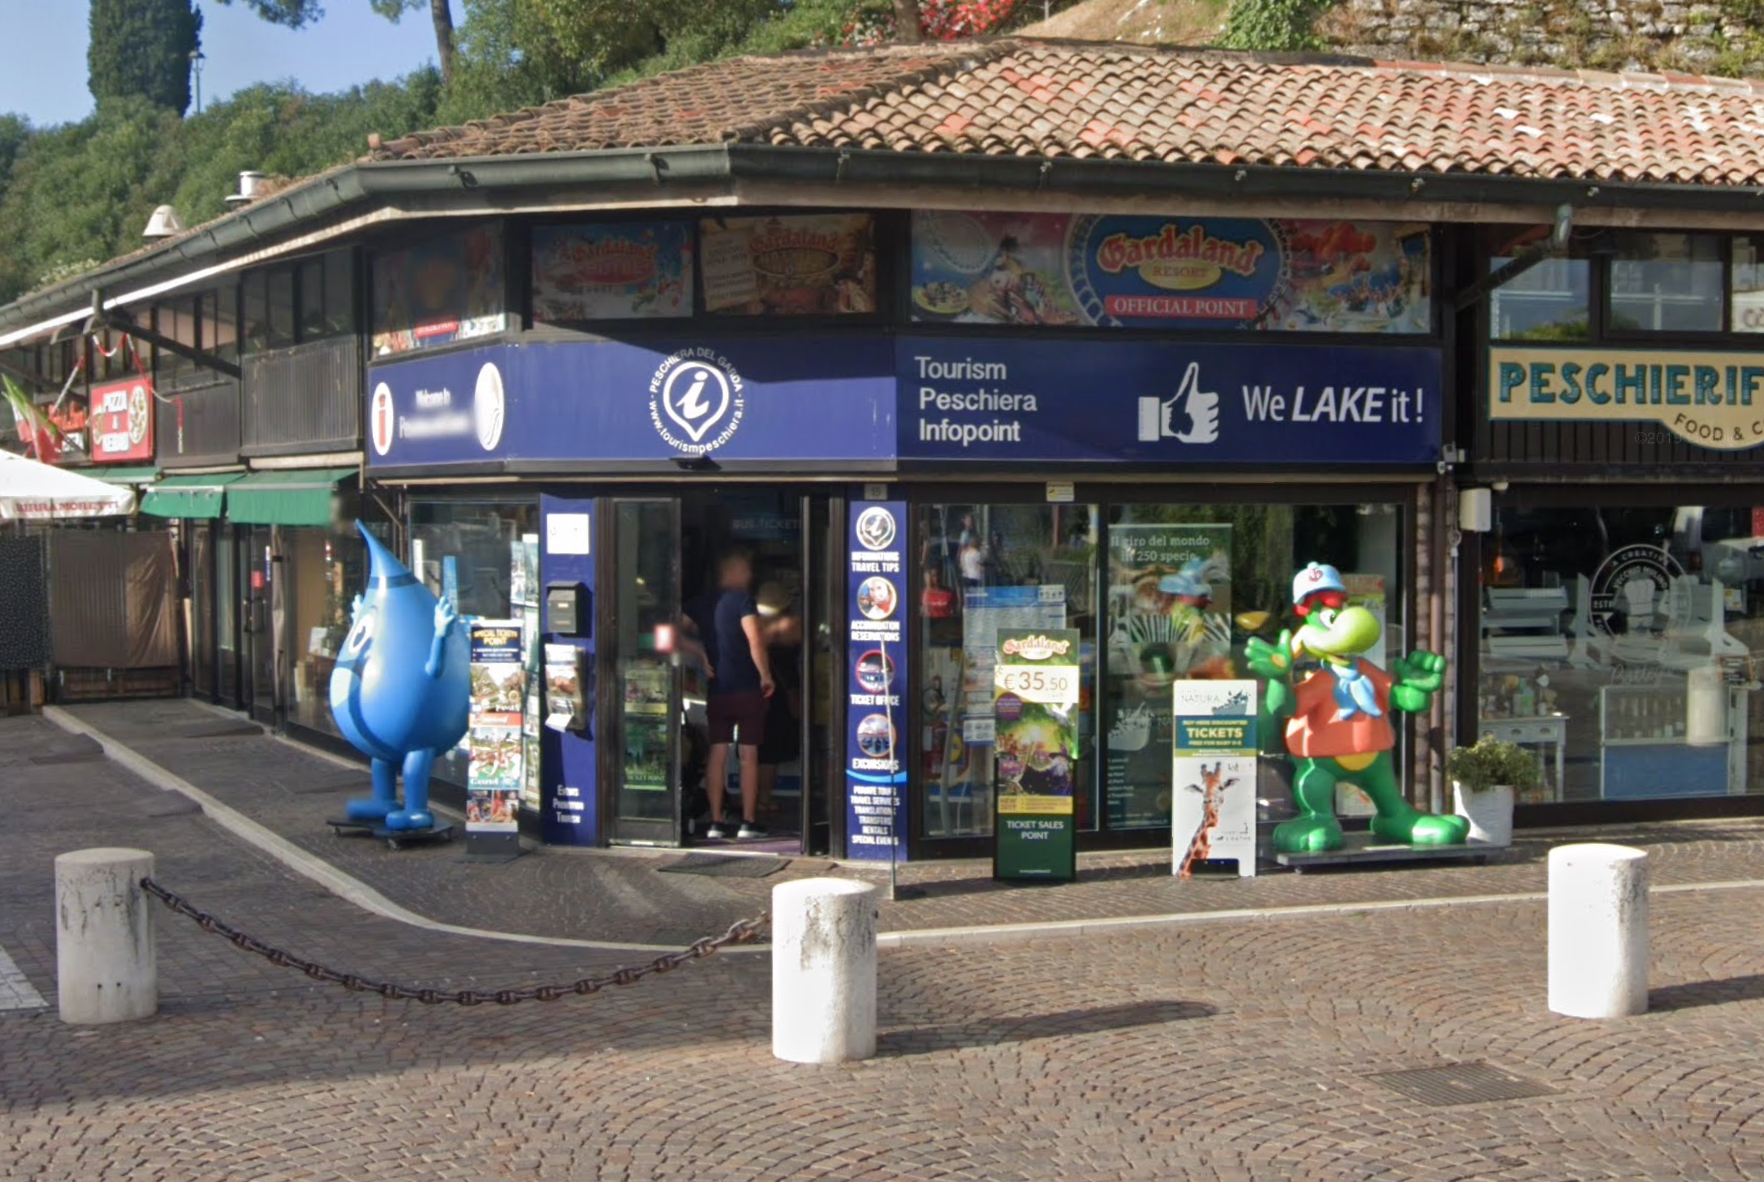 Tourism Peschiera Infopoint by Google Earth